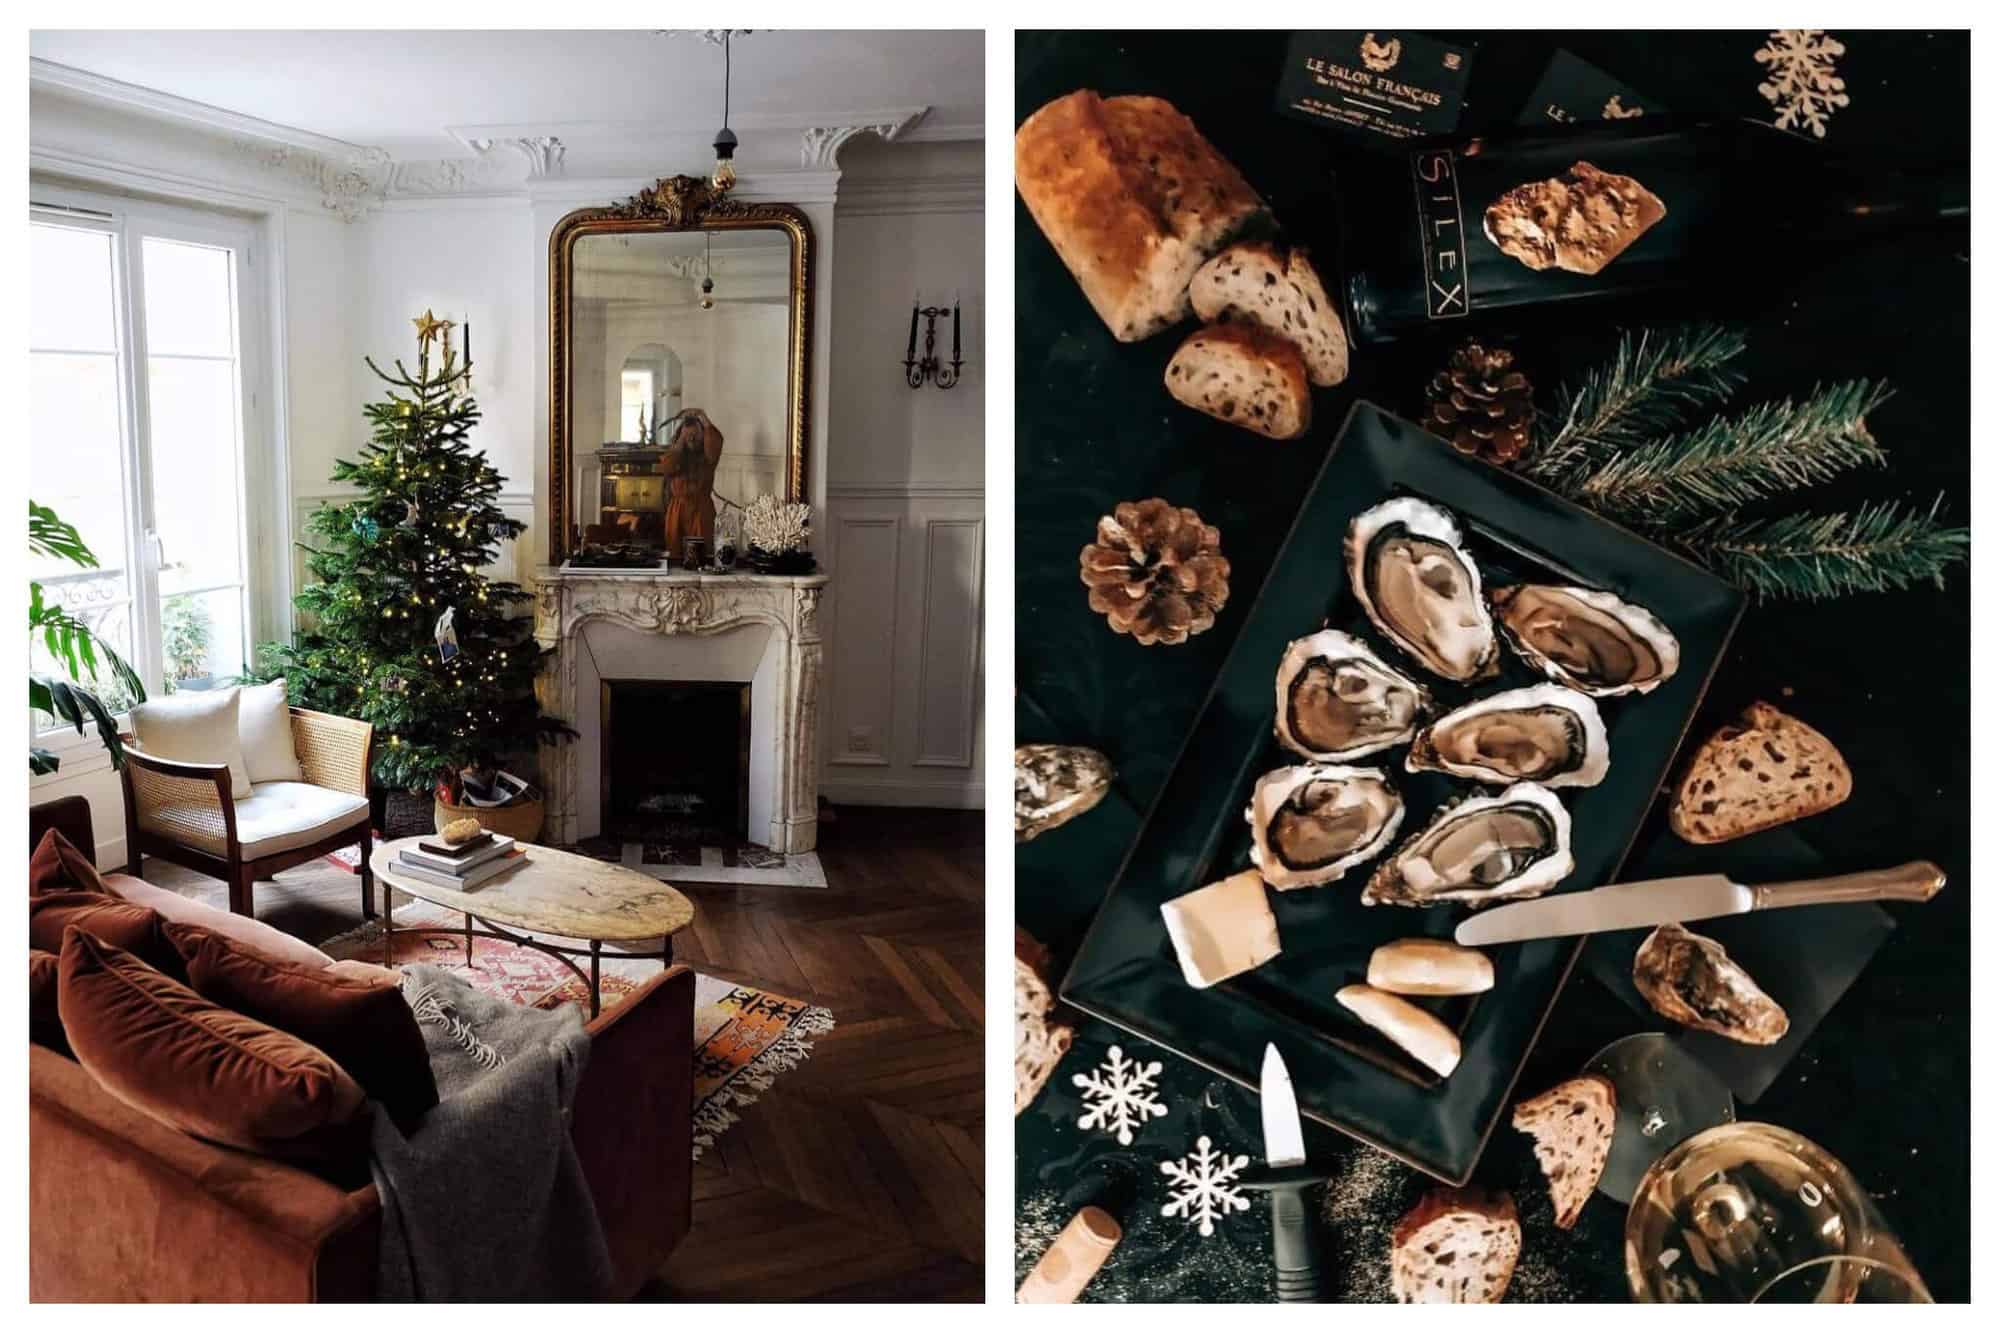 Left: the interior of a Parisian apartment at Christmastime. There is a large brown velvet couch to the left and a Christmas tree to the left of a fireplace straight ahead. There is a large gold framed mirror over the fireplace. The walls are white and there are hardwood floors. Right: an aerial view of a table with a plate of oysters, bread, butter and a butter knife. The table is dark green and is decorated with pine branches, pine cones and silver snowflakes.